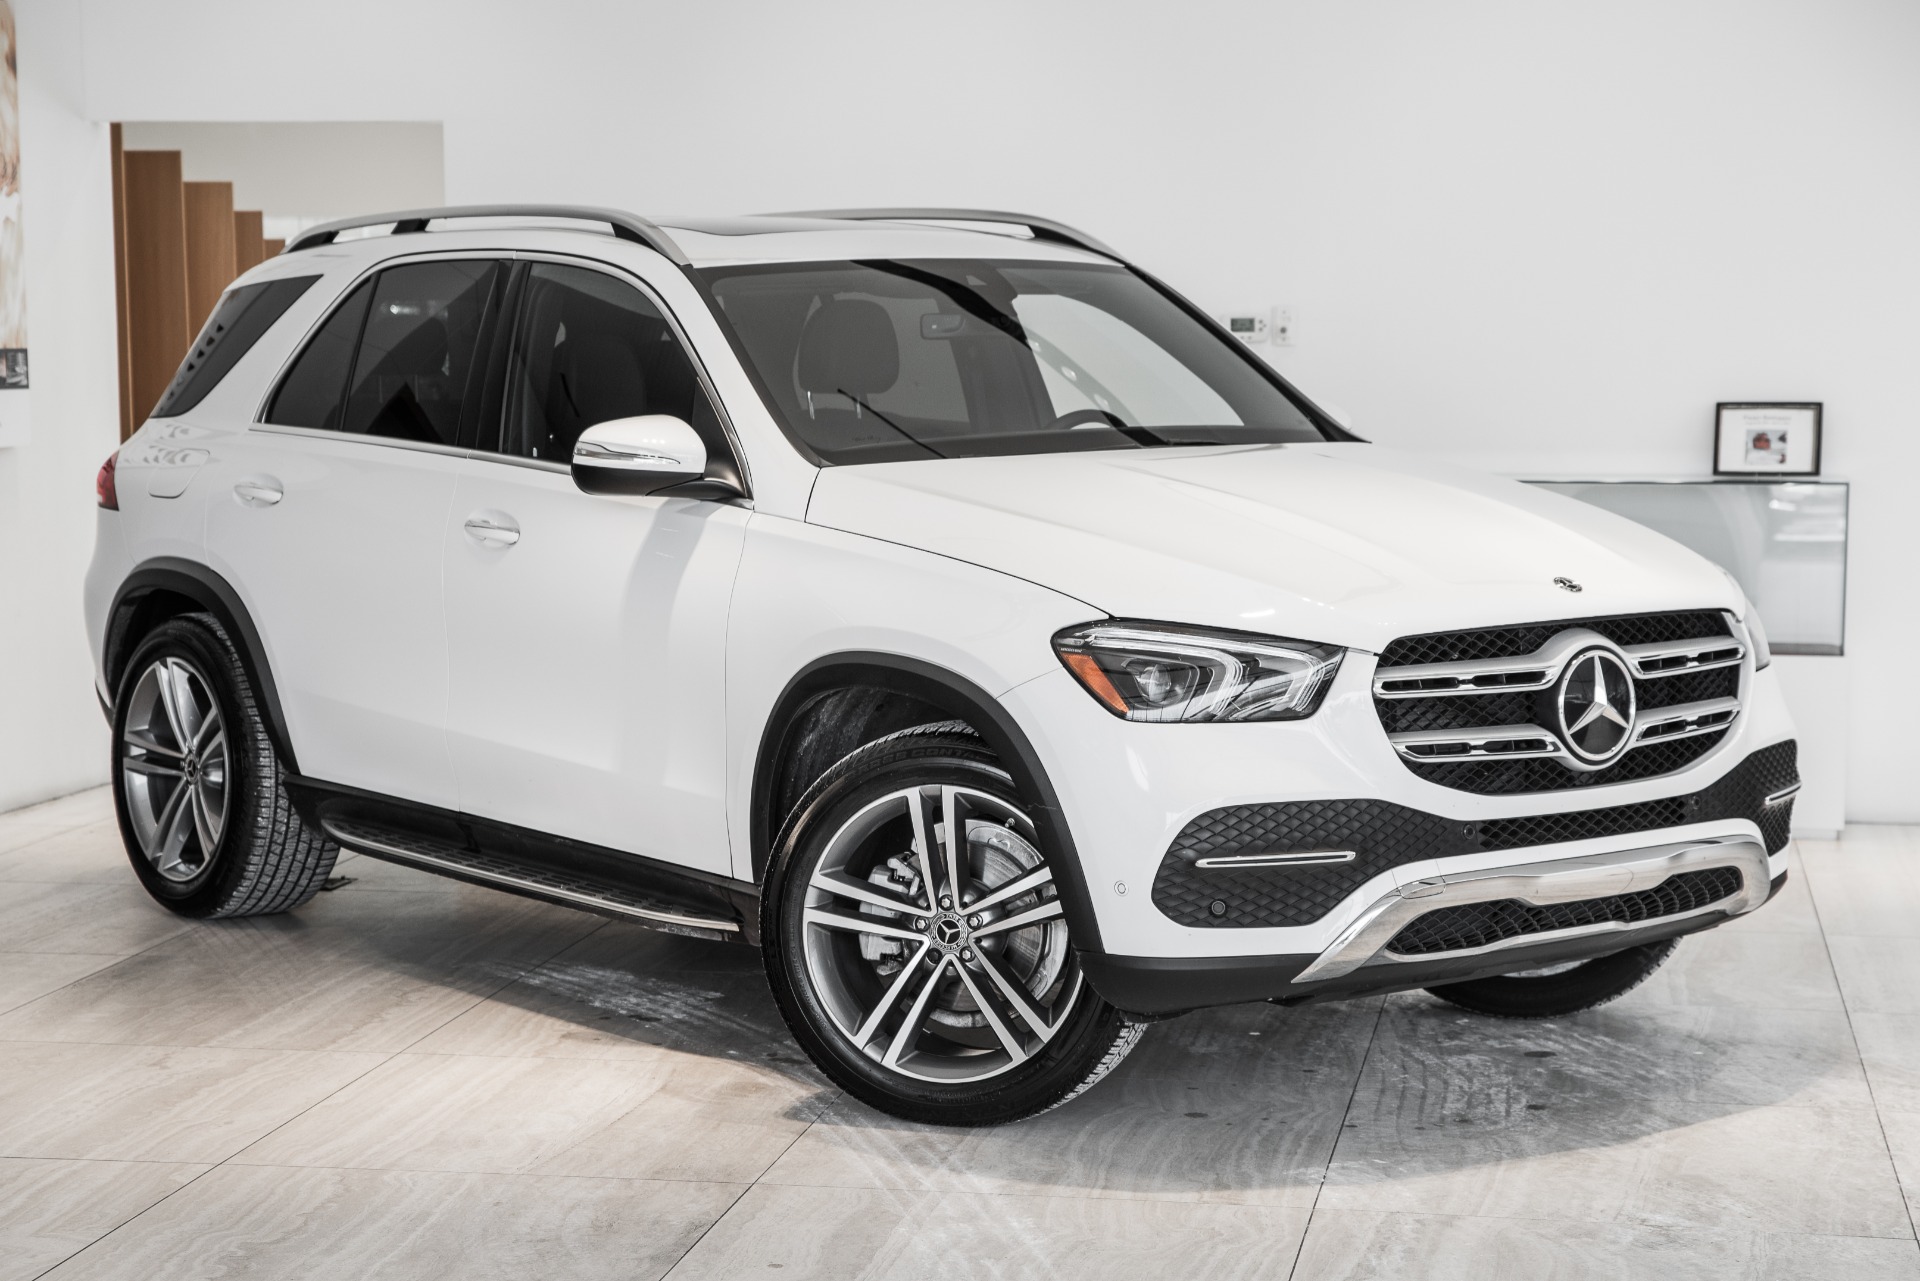 Mercedes-Benz W167 GLE-Class SUV – Ghost Links